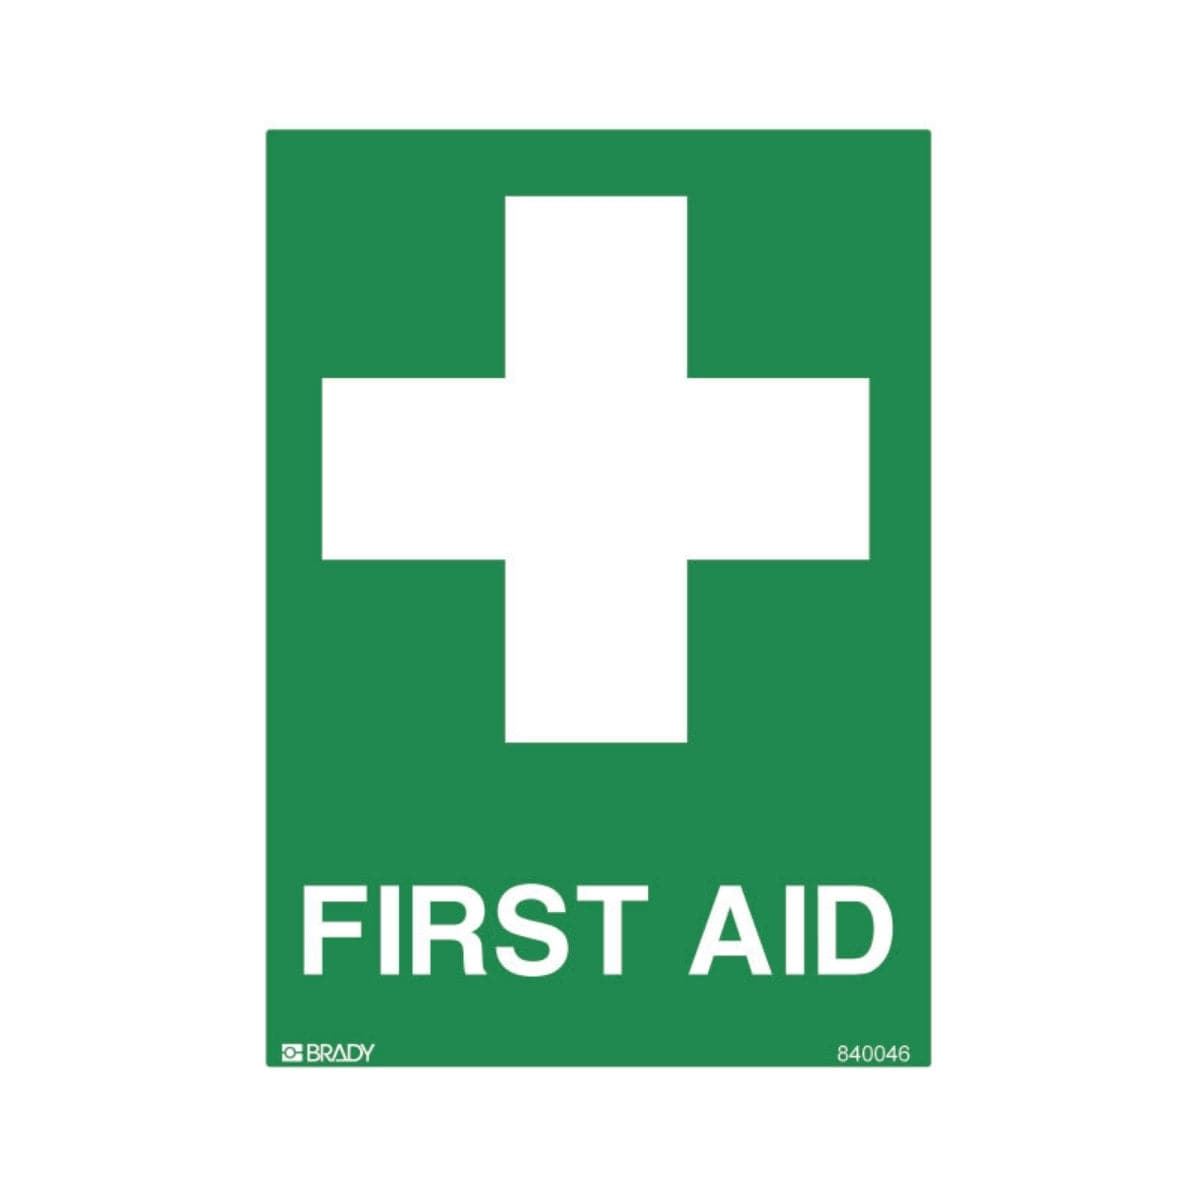 First Aid - With Cross Symbol (Pack of 5)